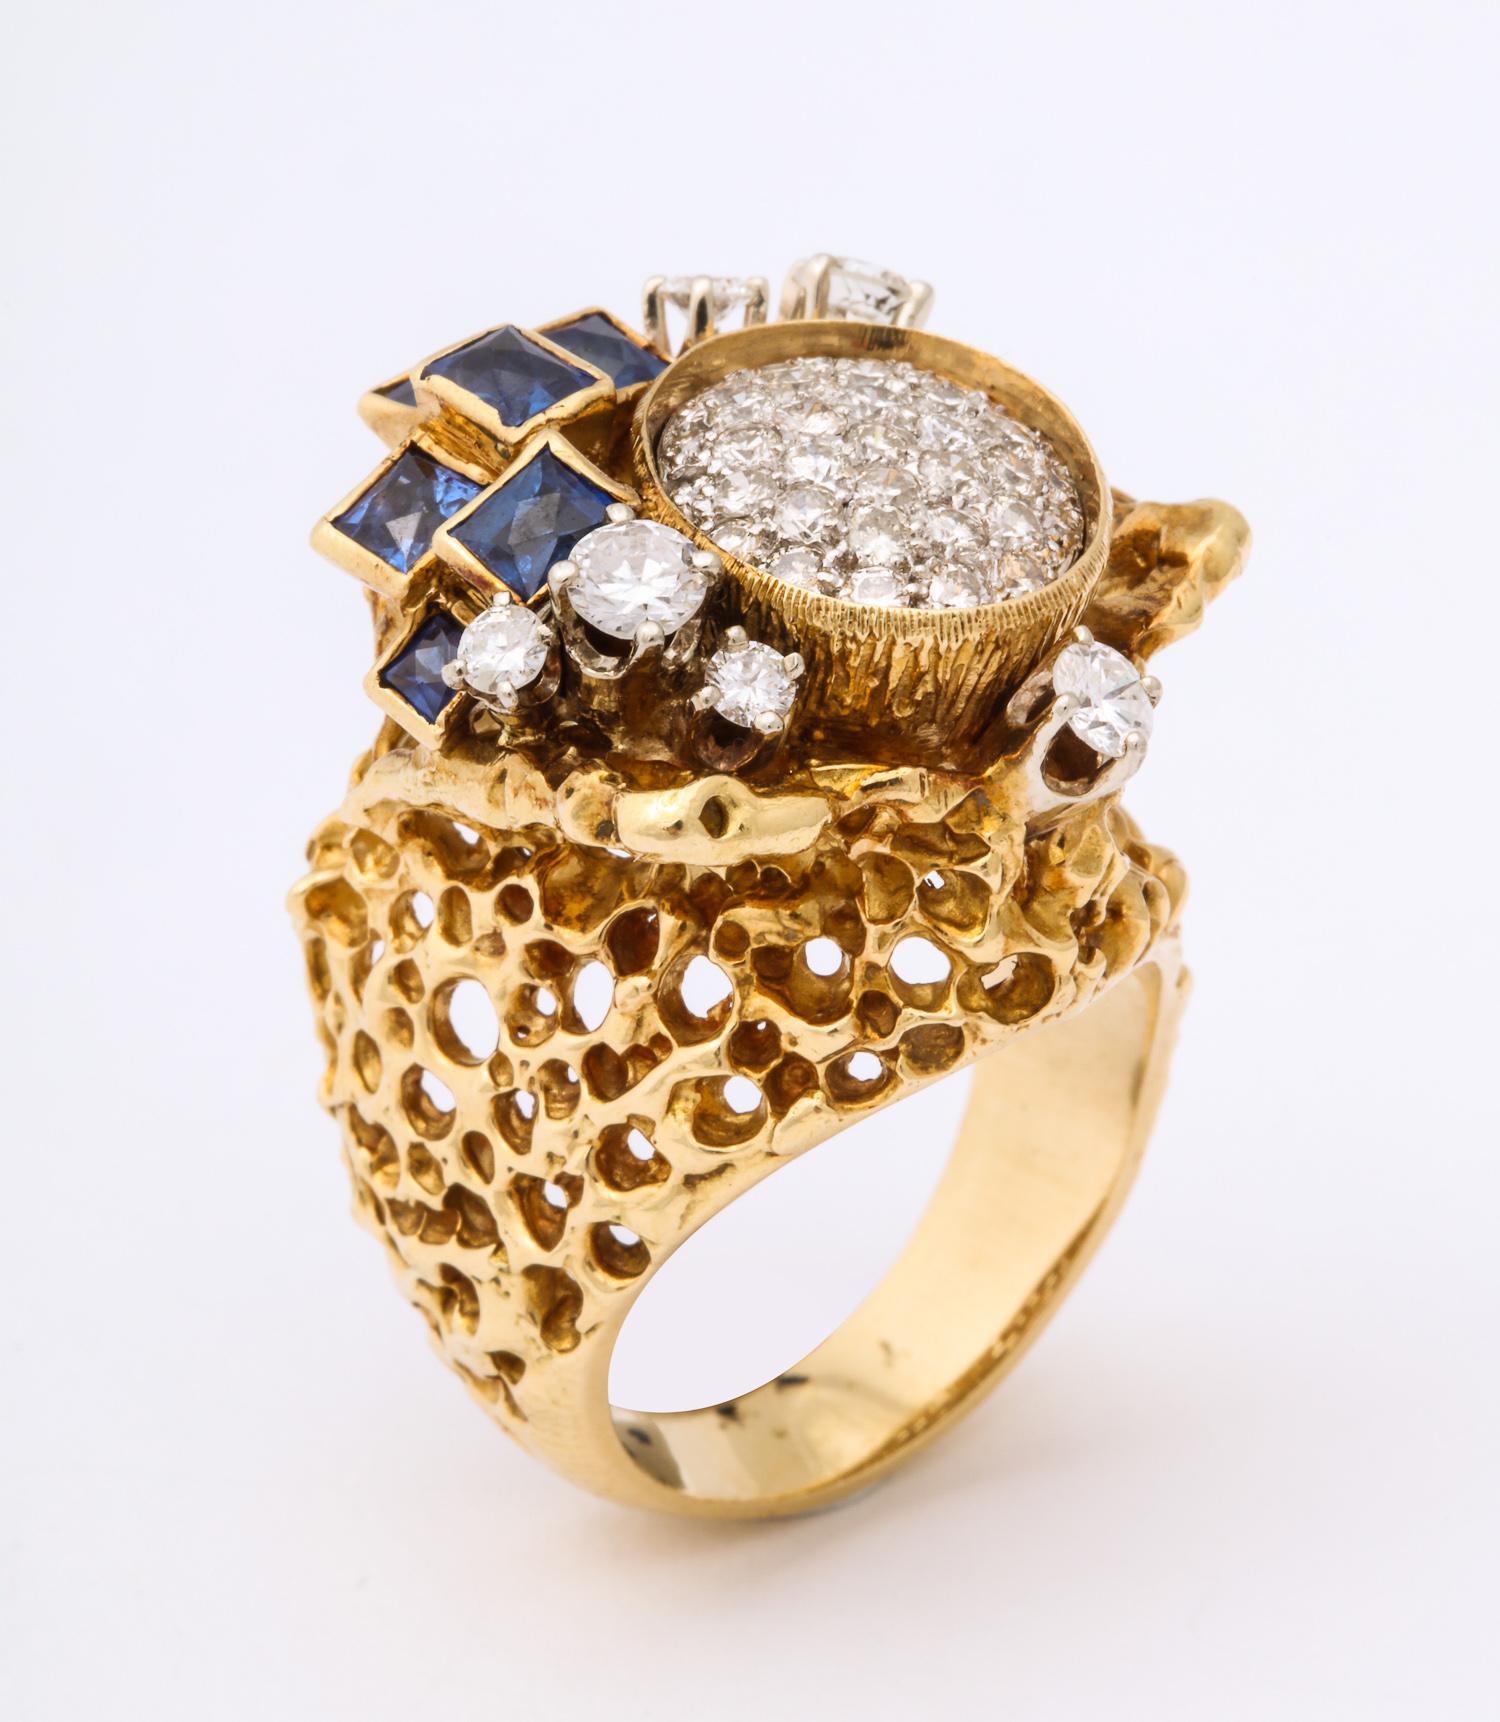 One Ladies 18kt Yellow Gold Free Form Design Cocktail Ring Composed Of An Open Crater Effect Mounting And Embellished With Numerous Full Cut Diamonds Weighing Approximately 2.40 Cts Total Weight. This Ring From The 1970's Is Also Designed With Six